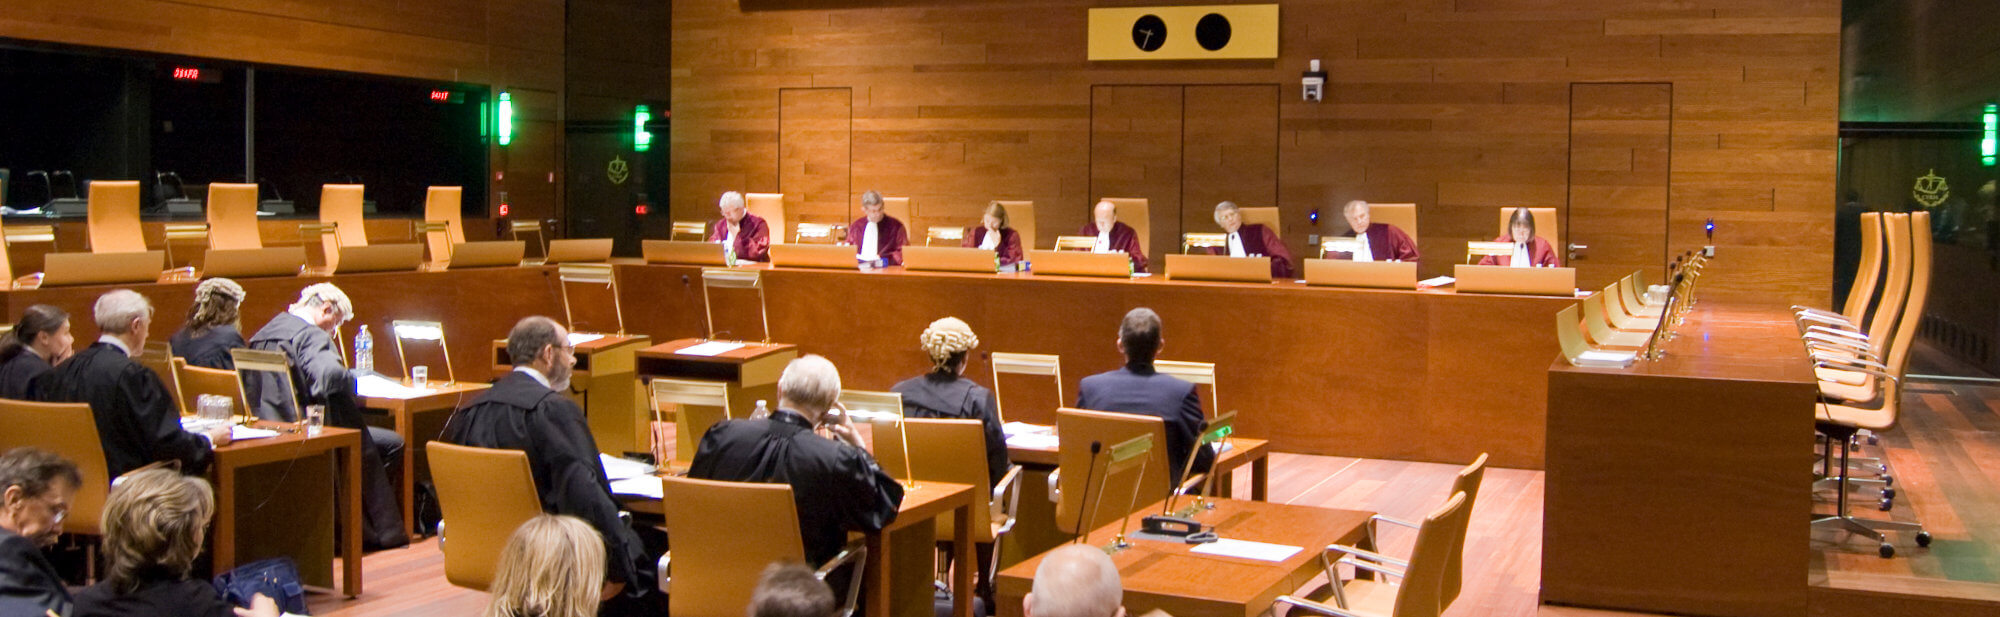 EU Court of Justice in session